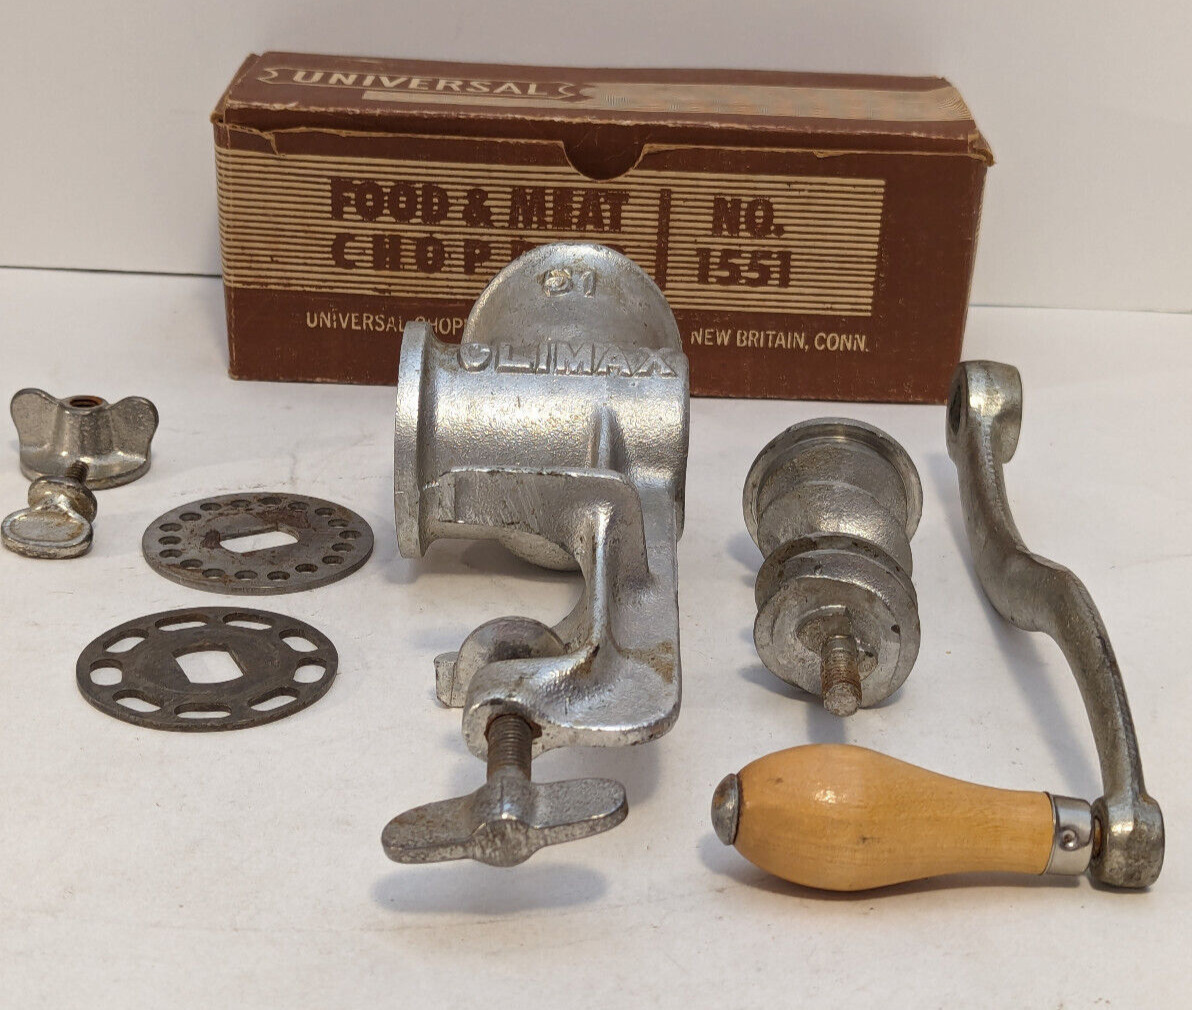 Vintage Universal Manual Meat Food Chopper Grinder with Box Model #1551 Climax